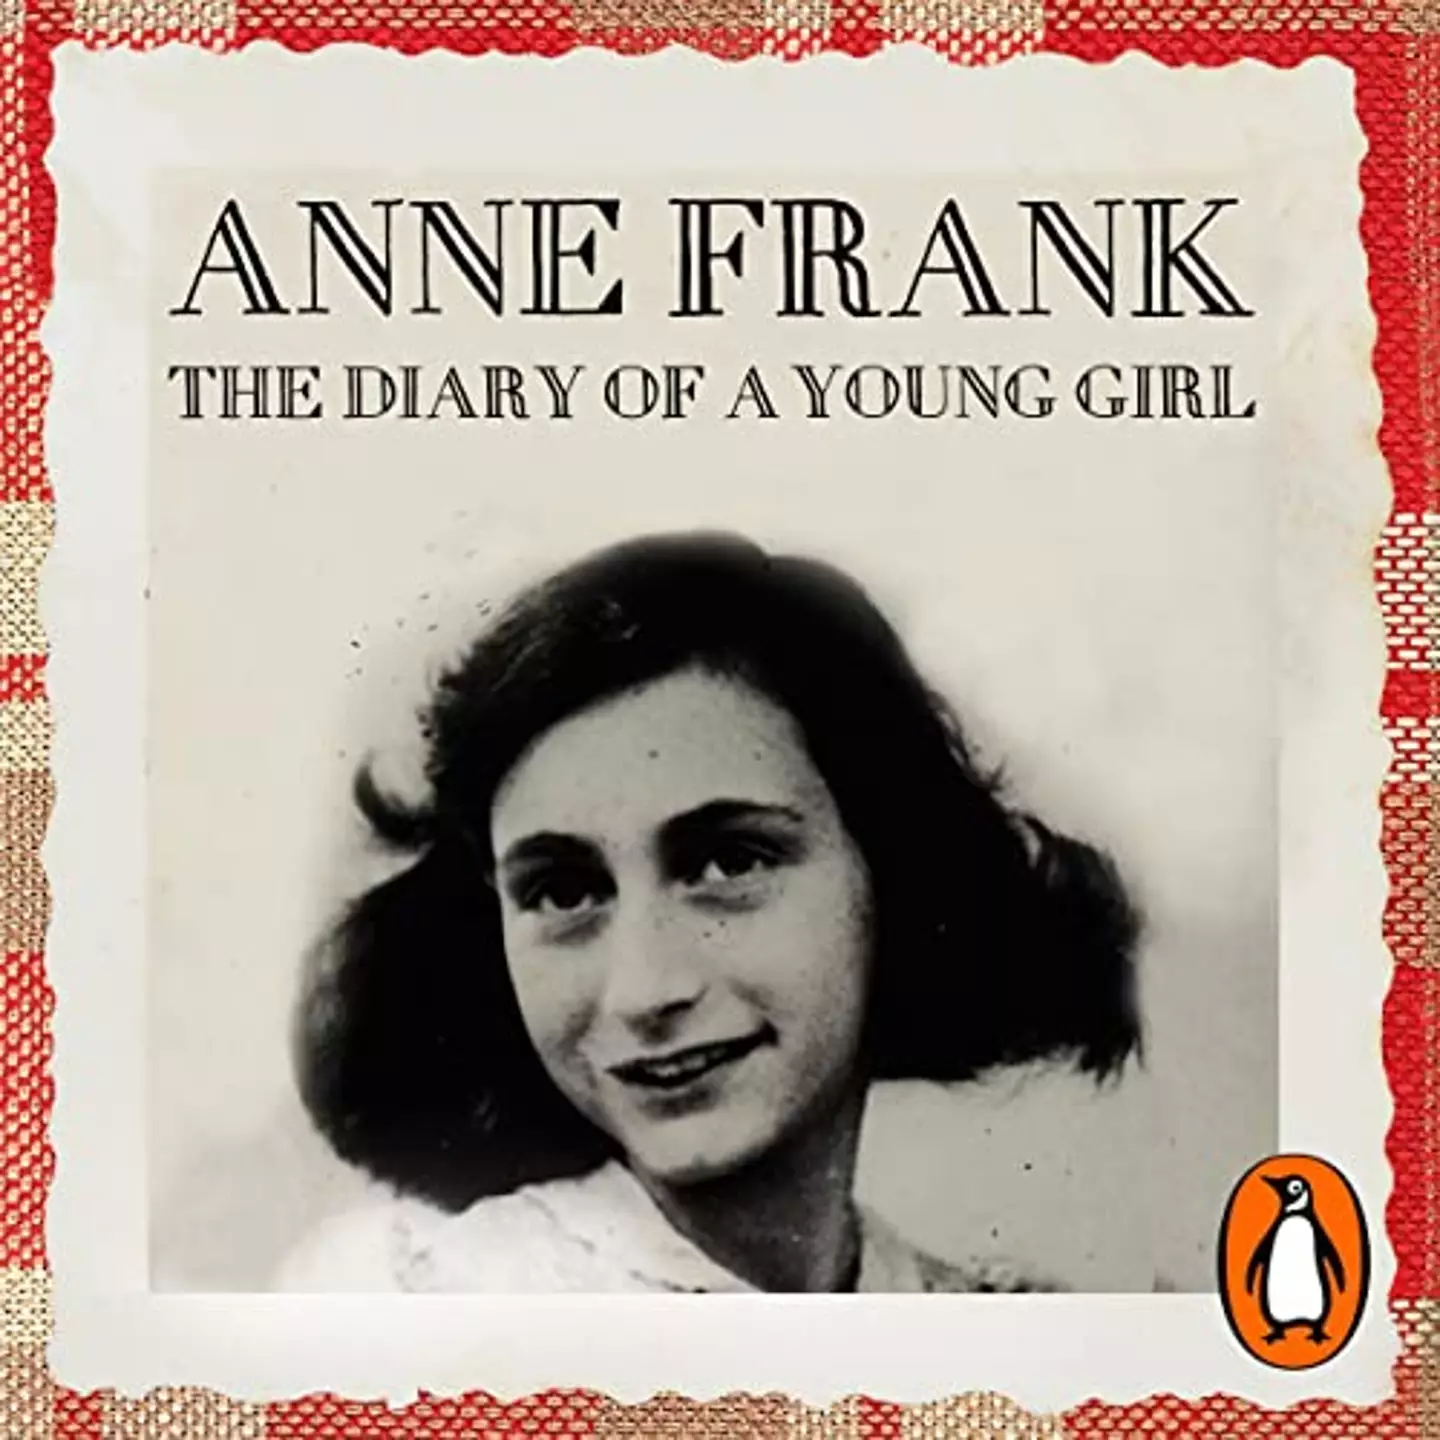 Anne Frank's Diary has been translated into 70 different languages since it was first published in 1947.